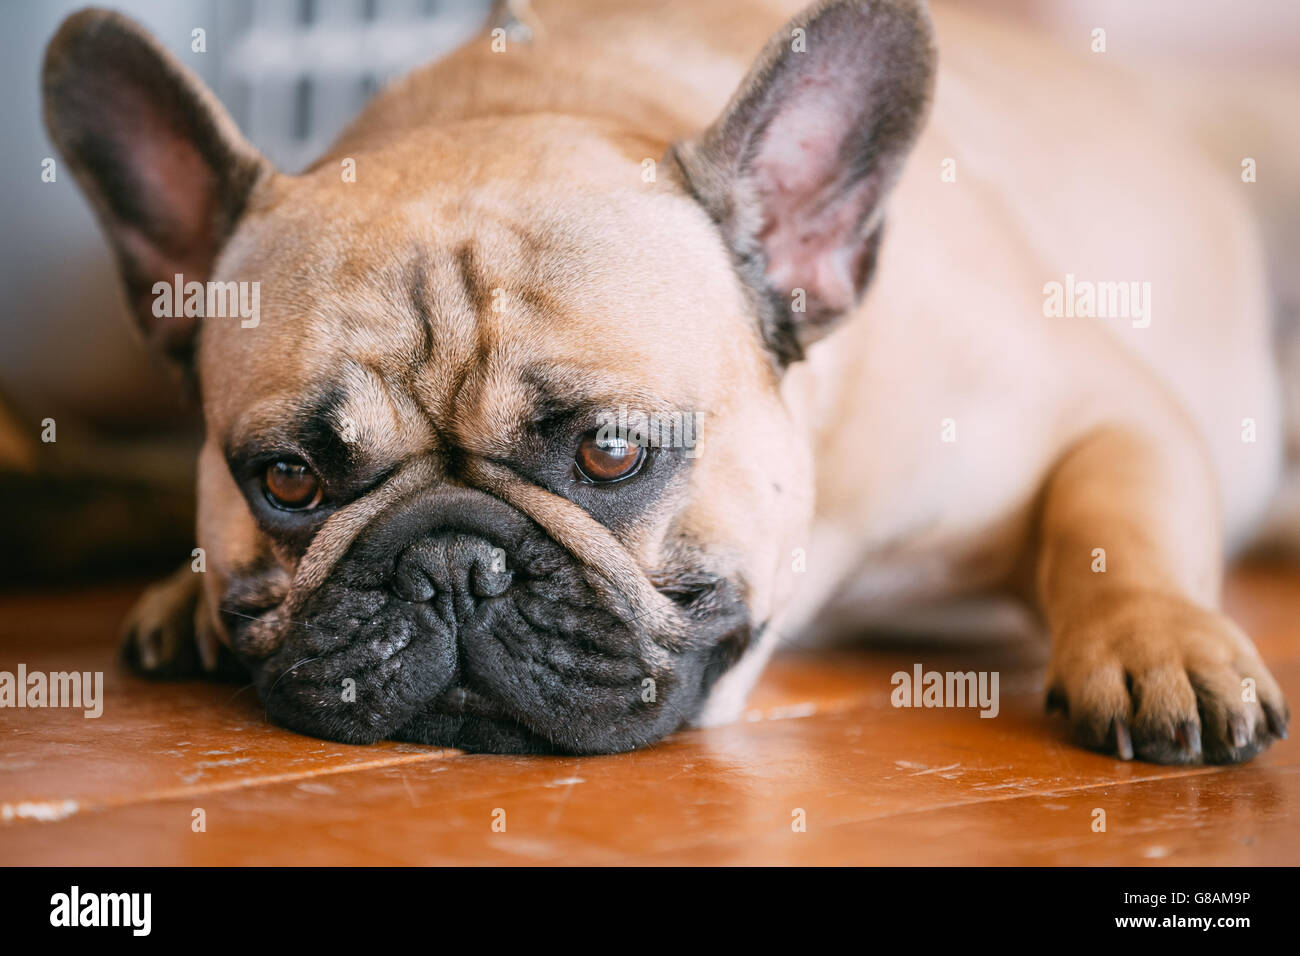 Sad Dog French Bulldog Sitting On Floor Indoor. The French Bulldog Is A Small Breed Of Domestic Dog Stock Photo